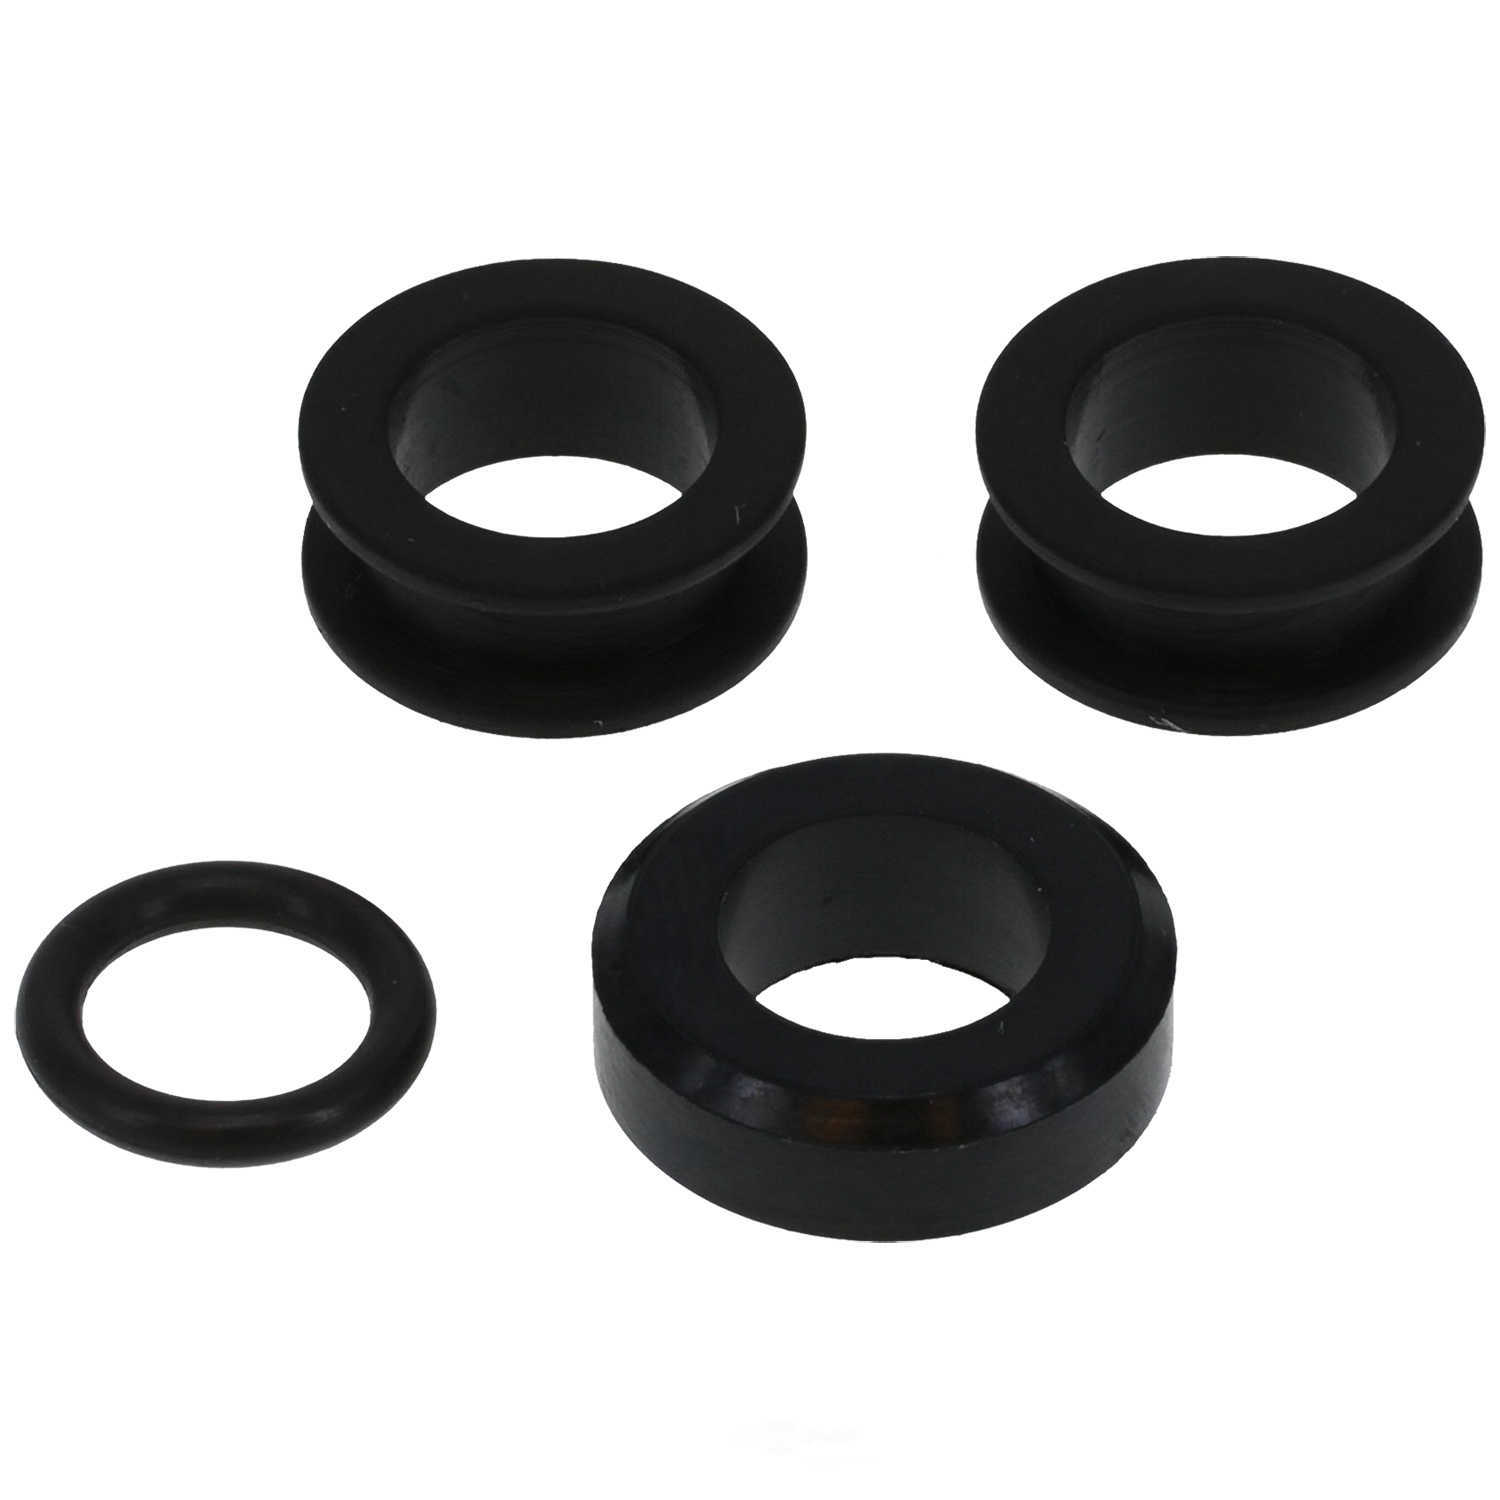 GB REMANUFACTURING INC. - Fuel Injector Seal Kit - GBR 8-006